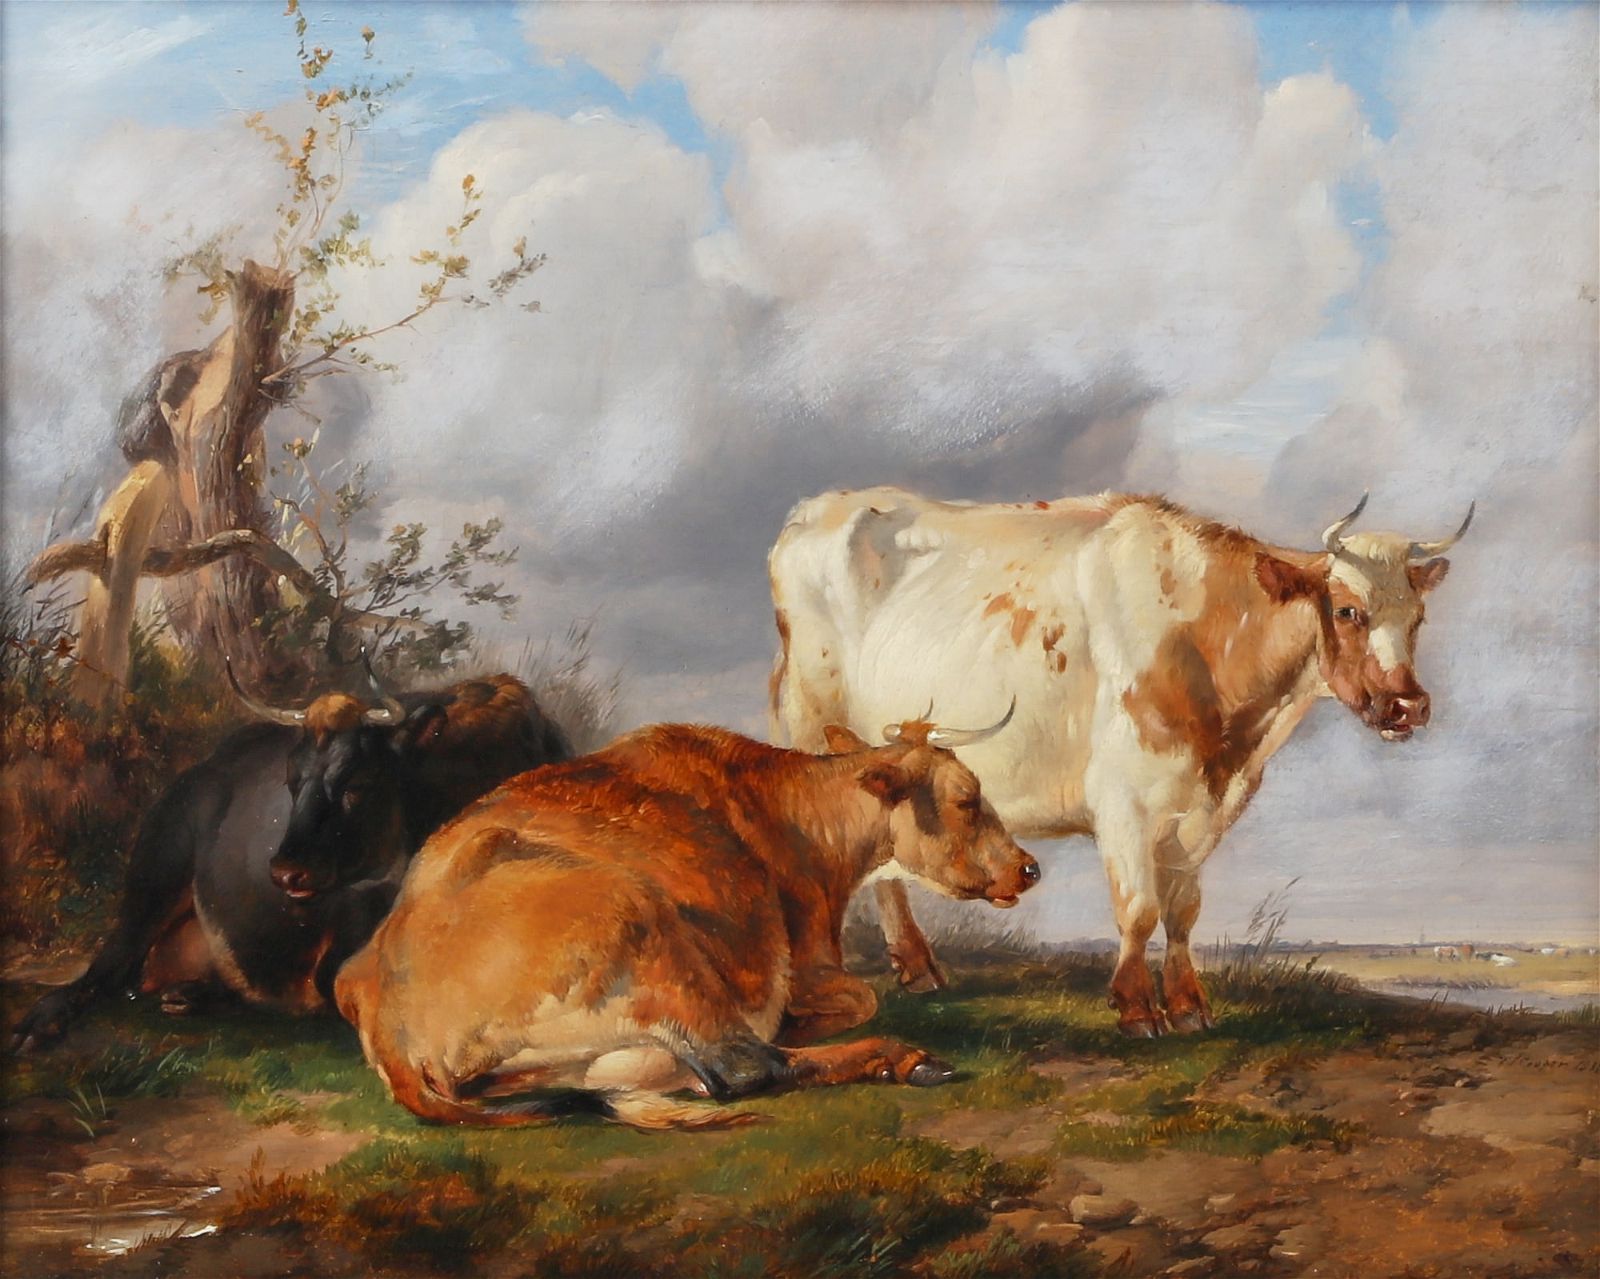 THOMAS SIDNEY COOPER, COWS IN AN